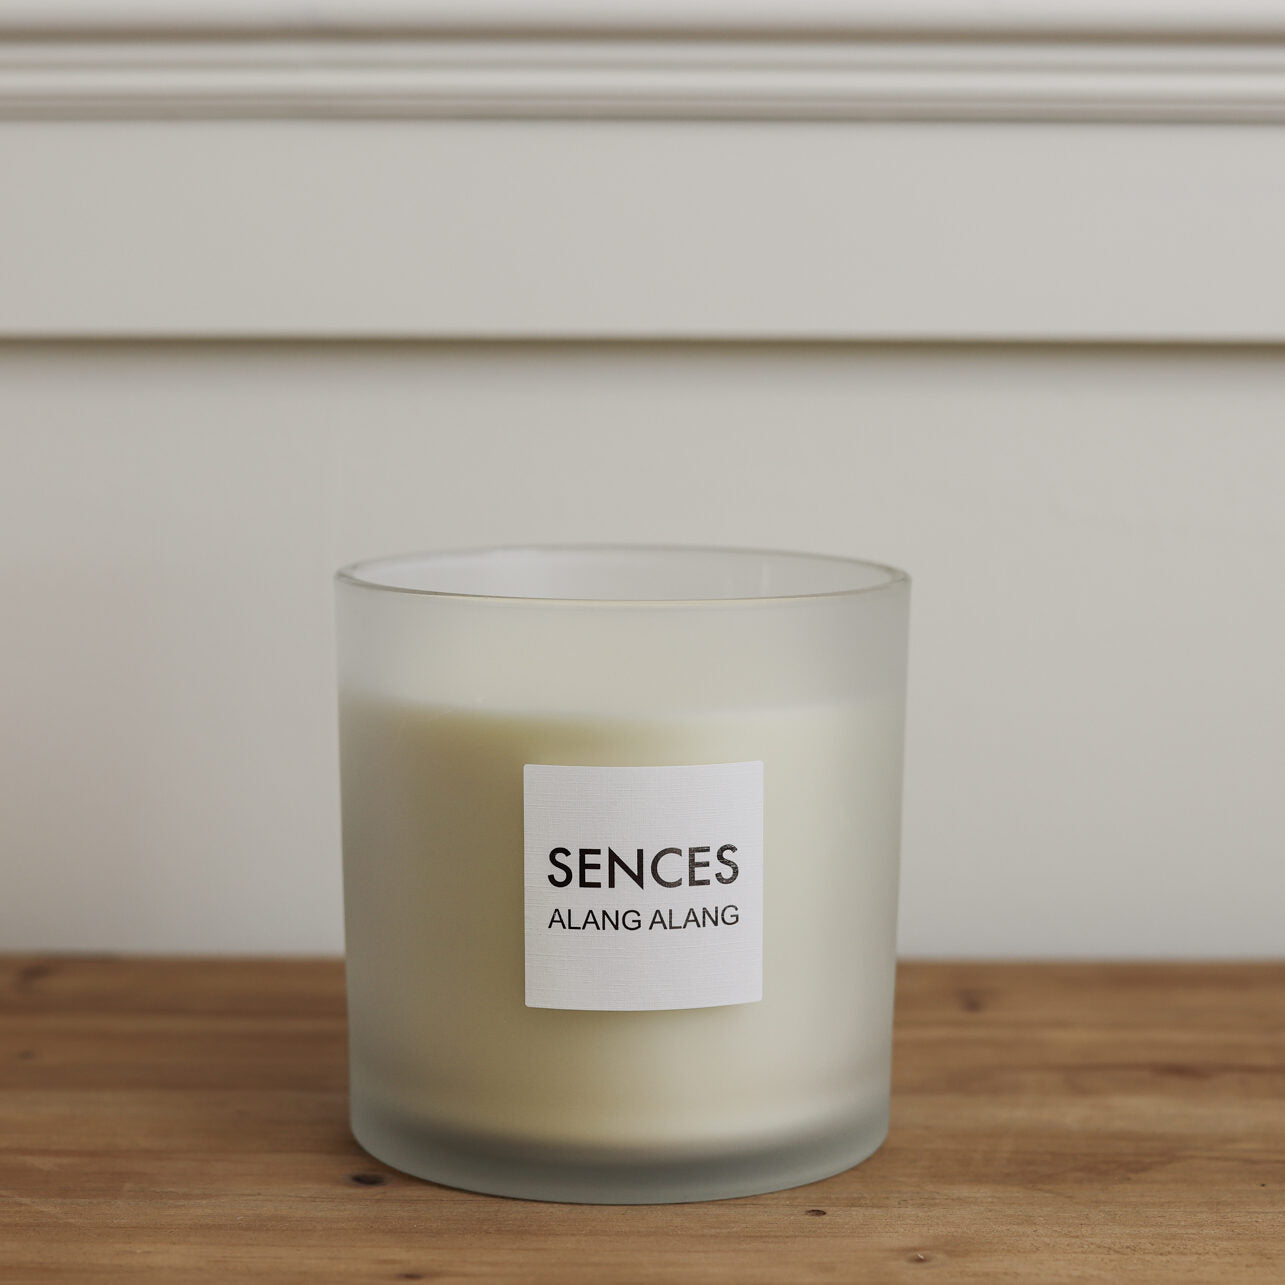 Sences Alang Alang White three wick candle in frosted glass on wooden table.